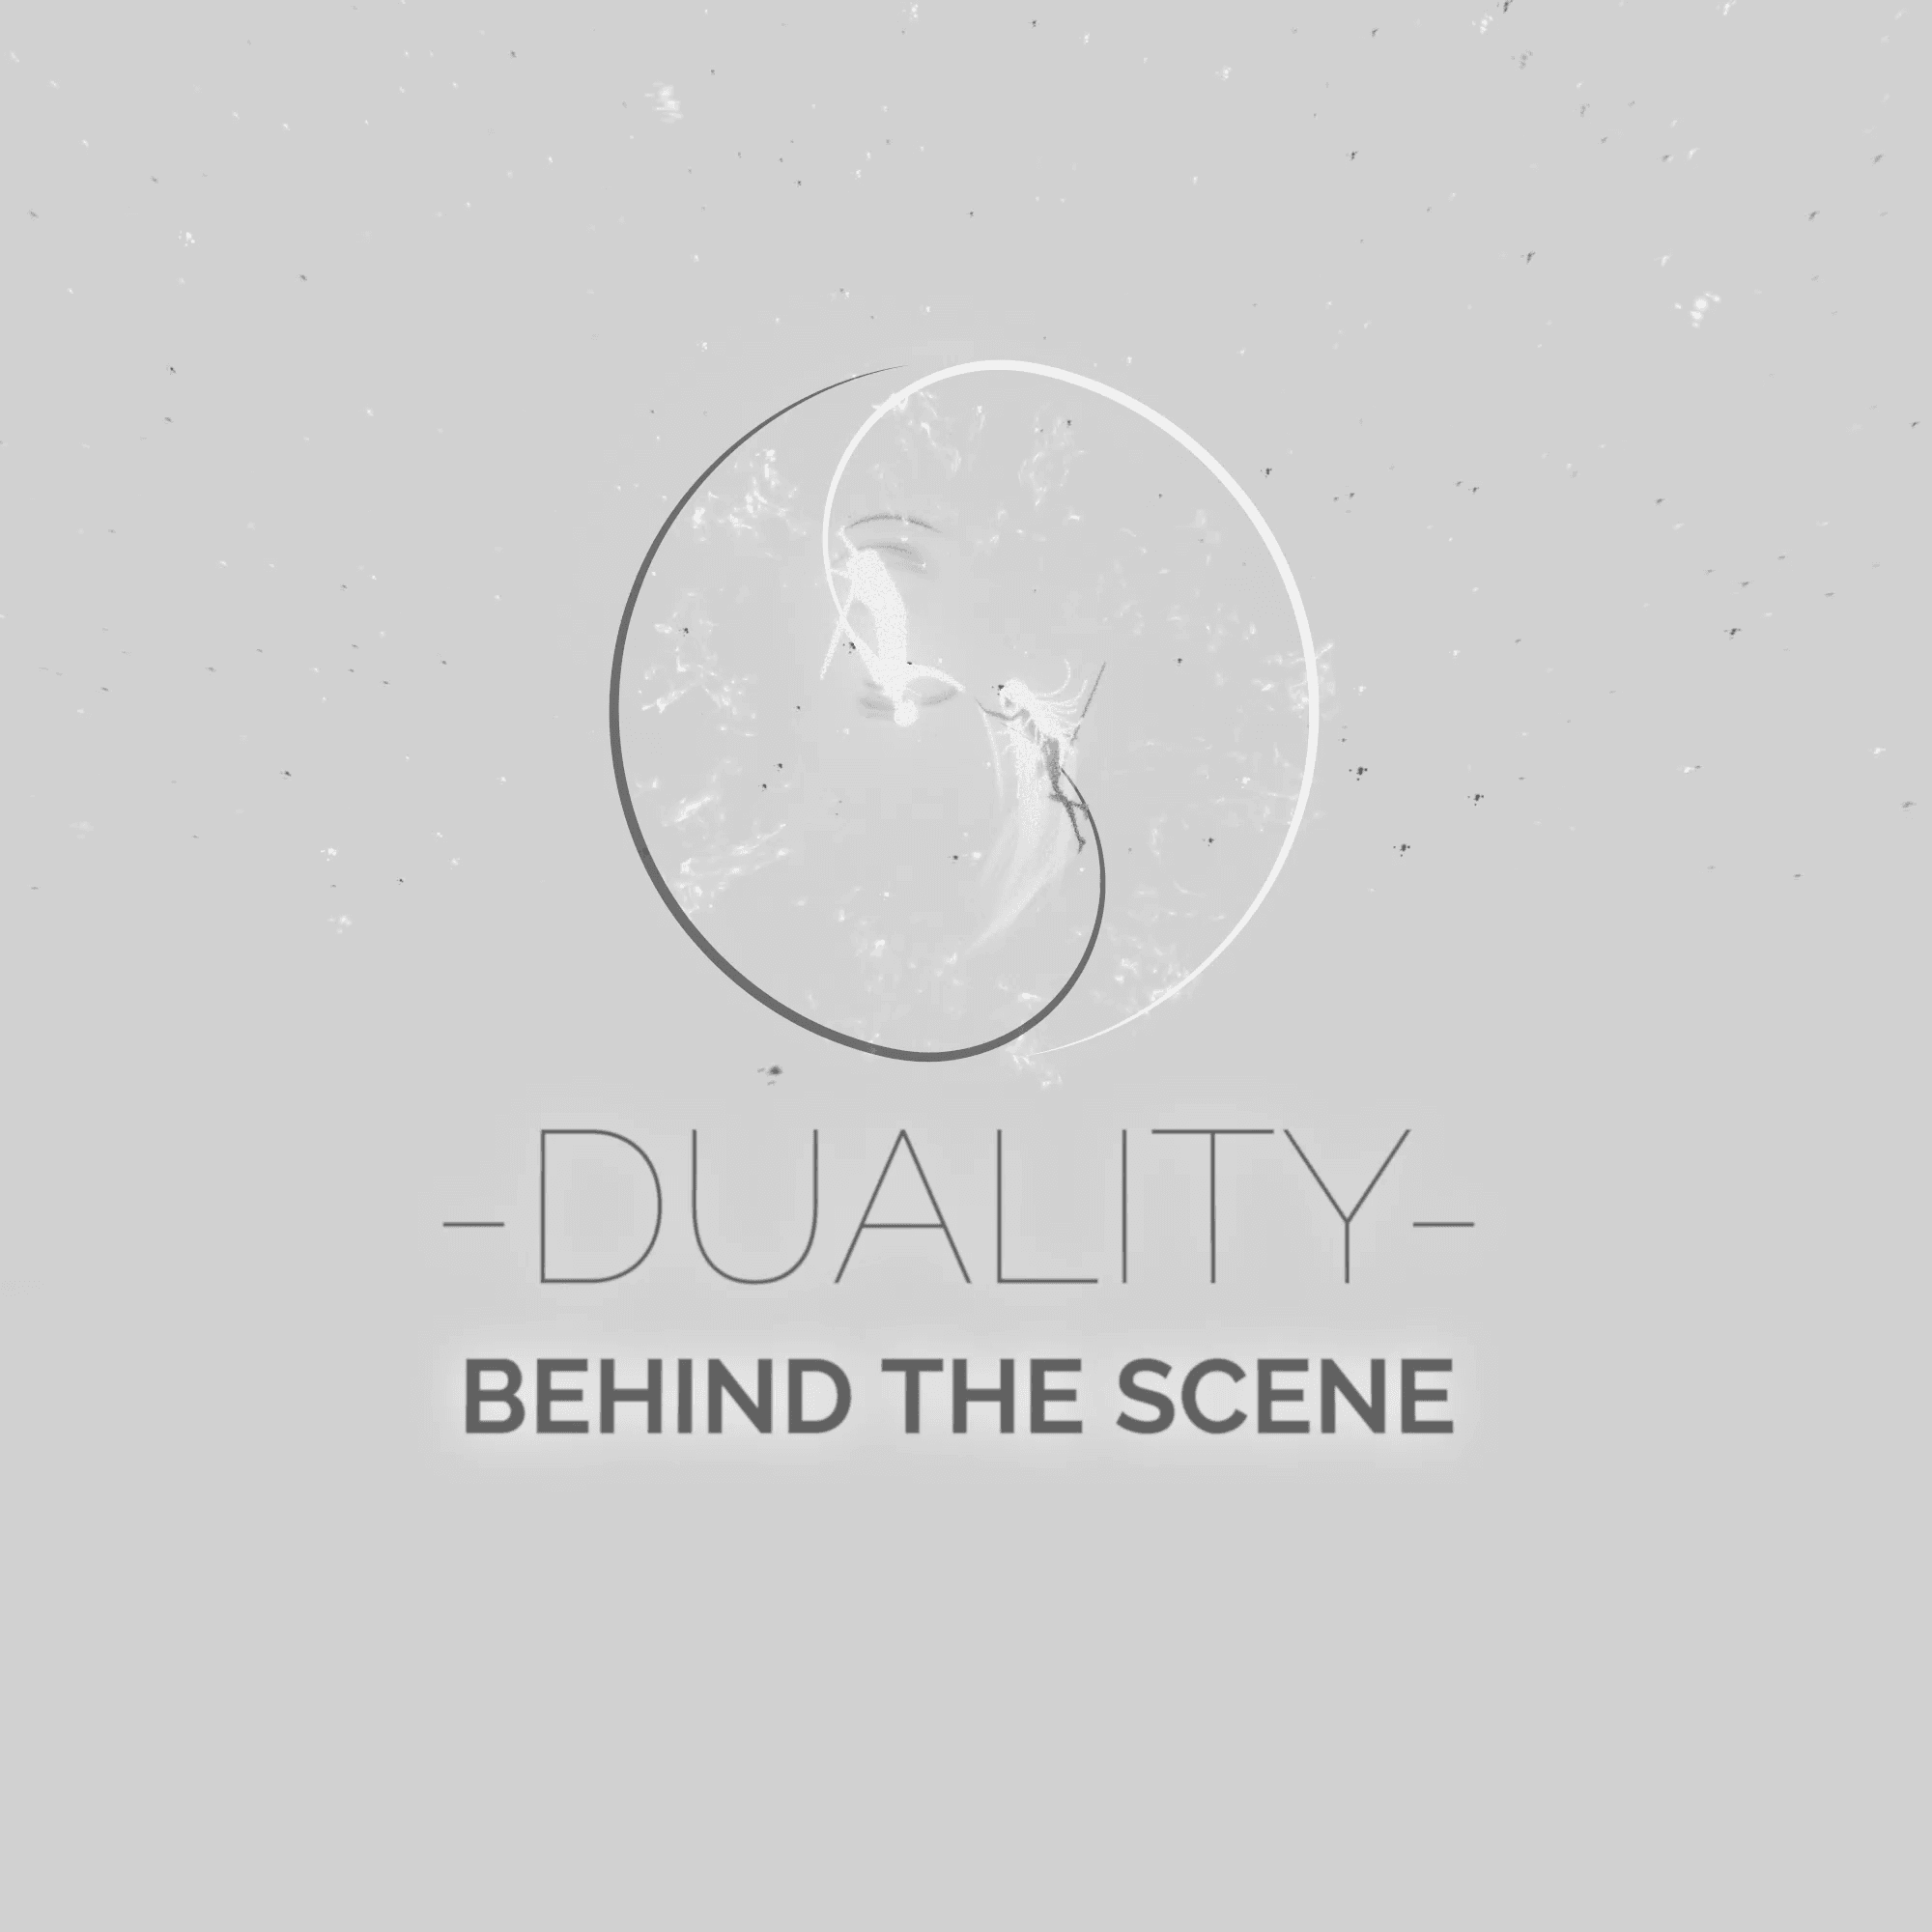 Duality - Behind the scene